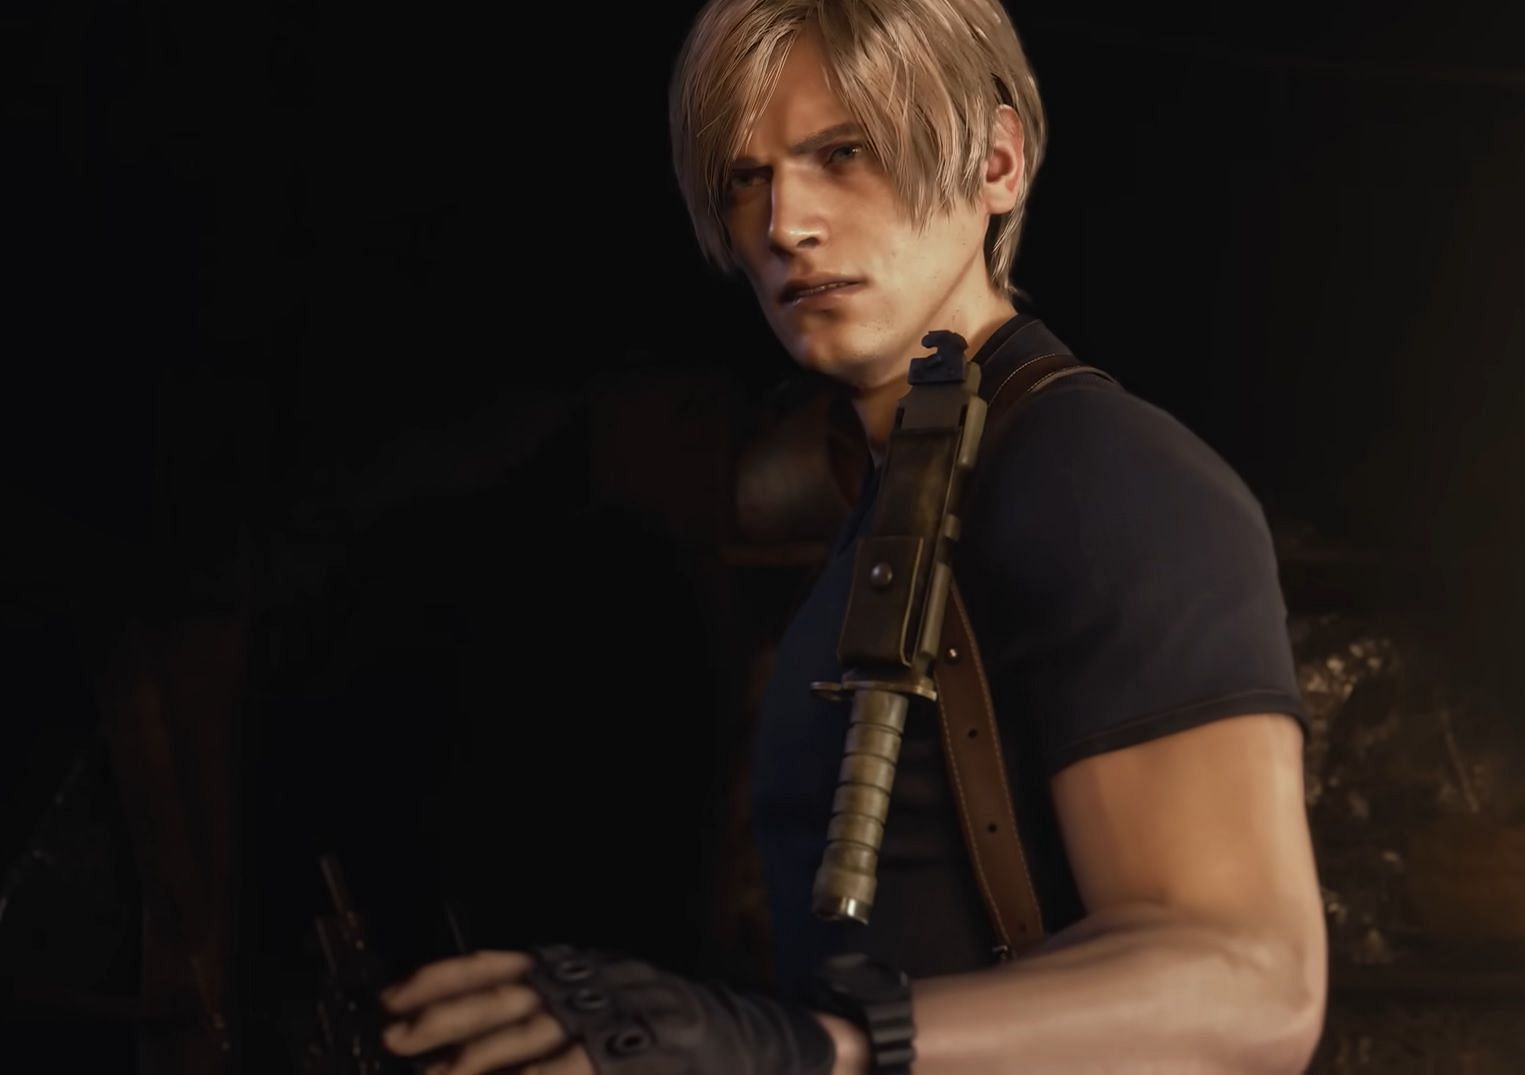 How tall is leon kennedy